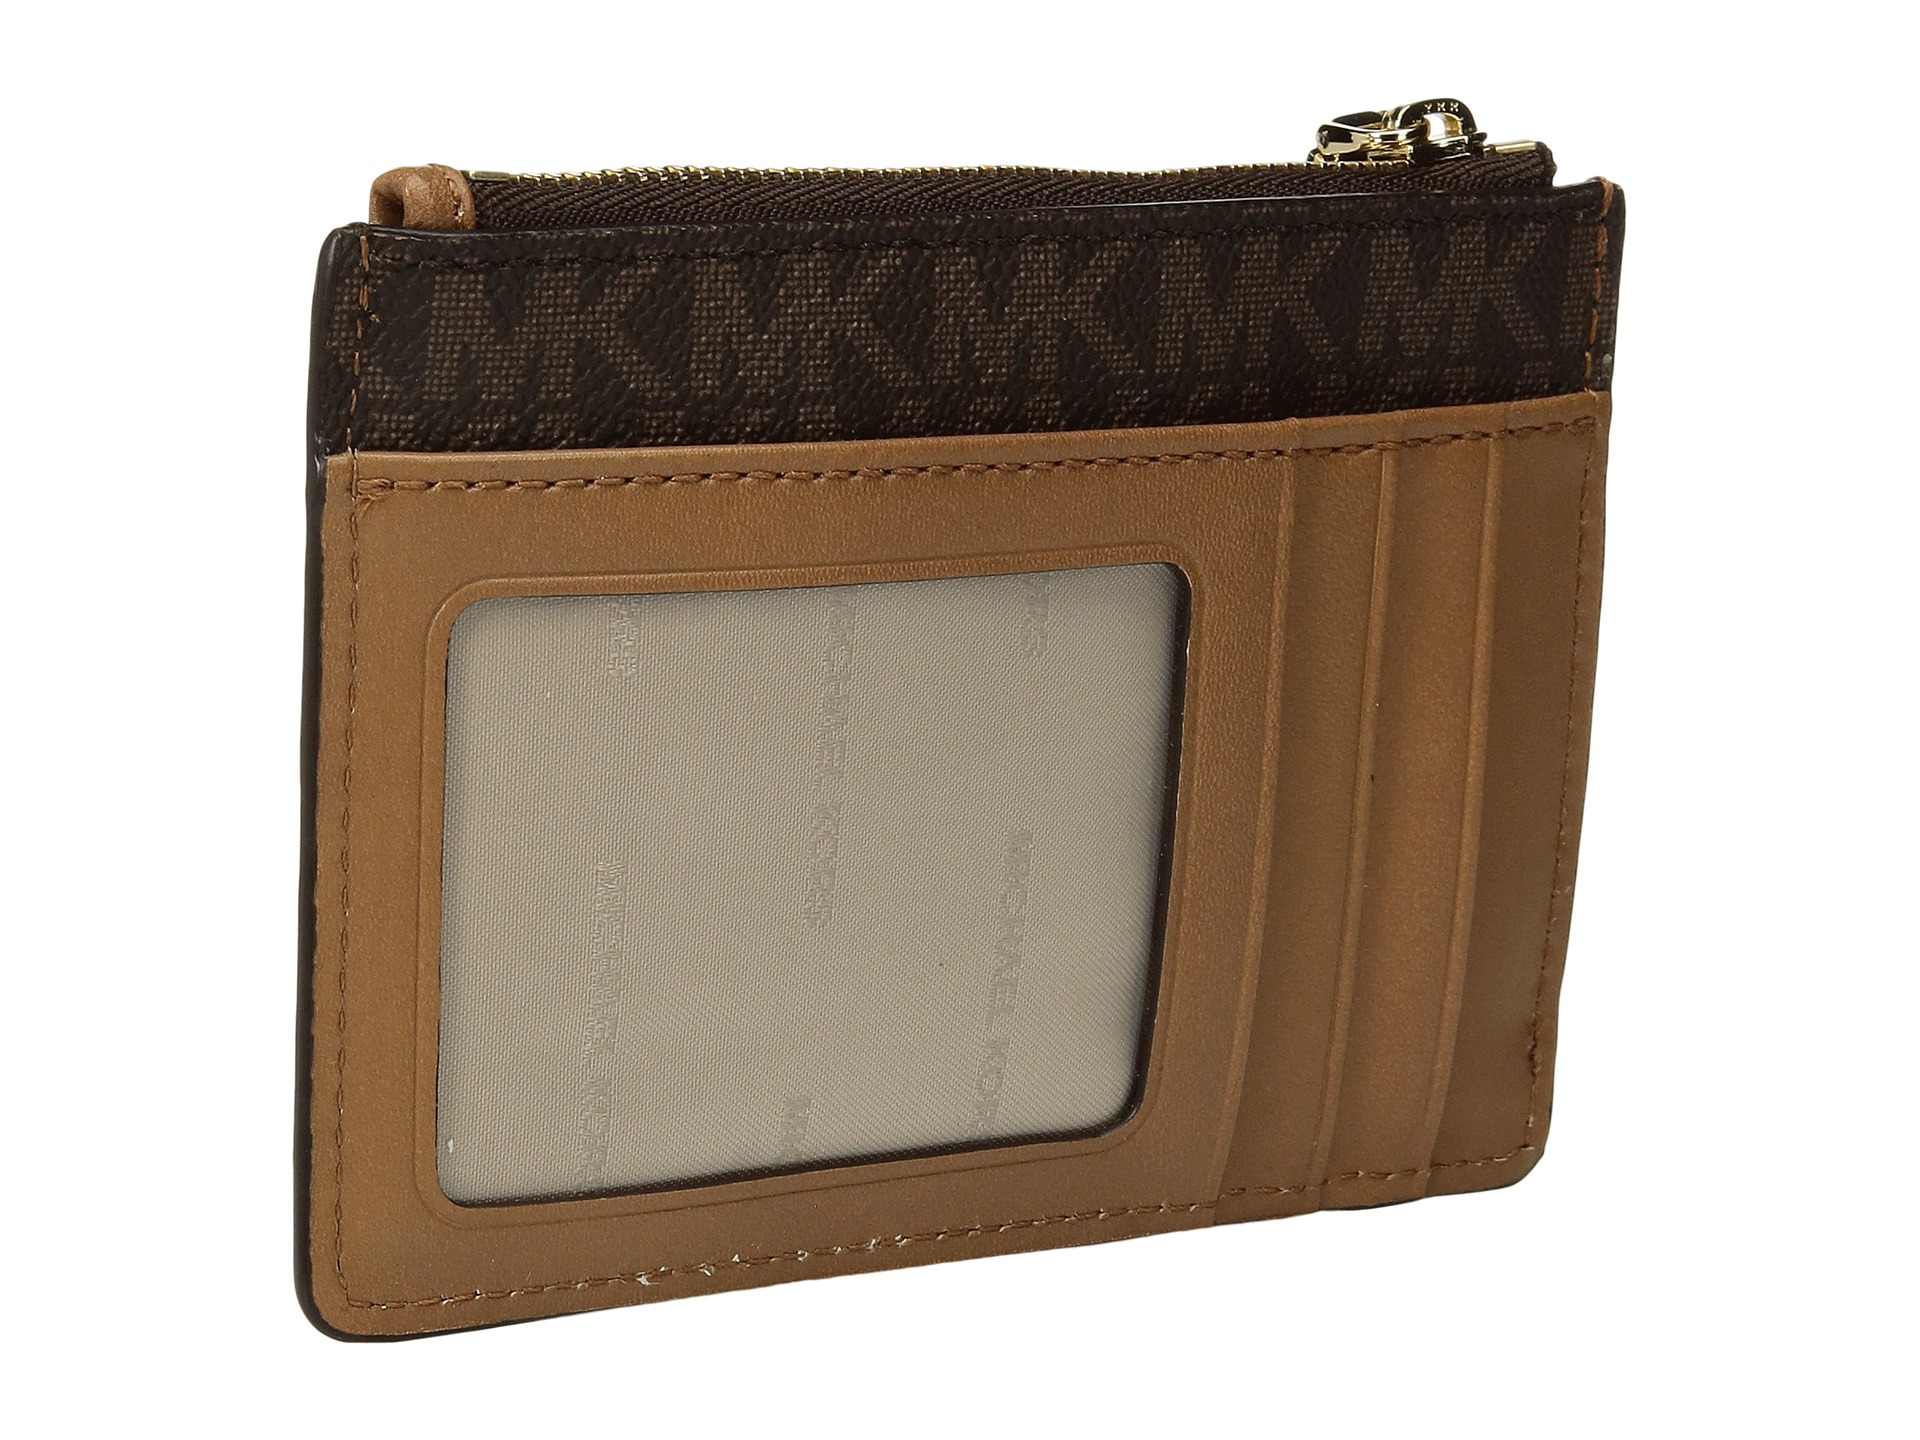 MICHAEL Michael Kors Mercer Small Coin Purse at www.bagssaleusa.com/product-category/neverfull-bag/